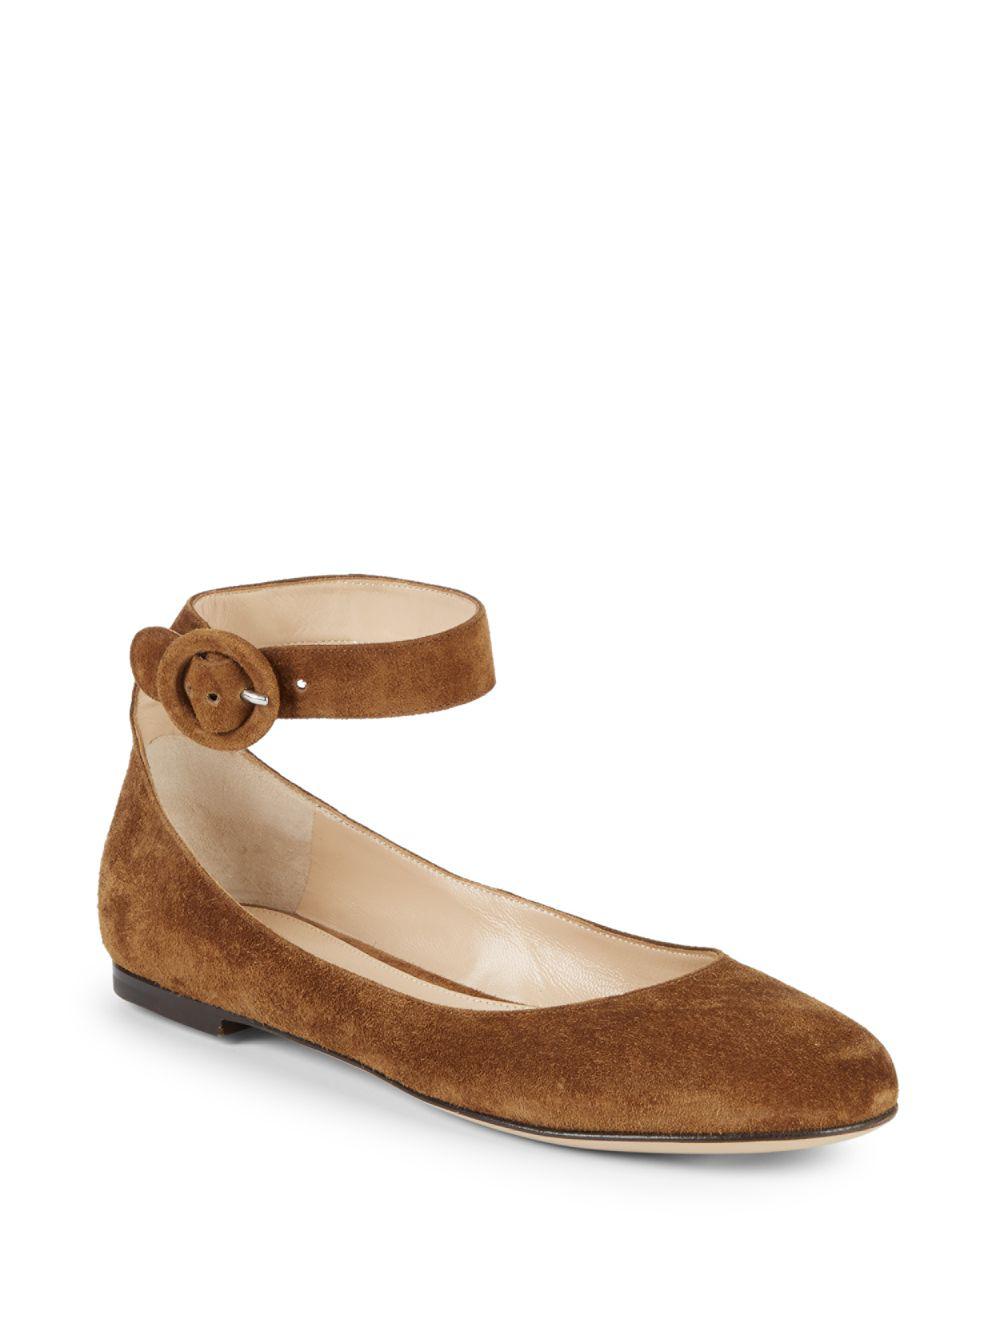 Lyst - Gianvito Rossi Virna Suede Ankle-strap Ballet Flats in Brown ...